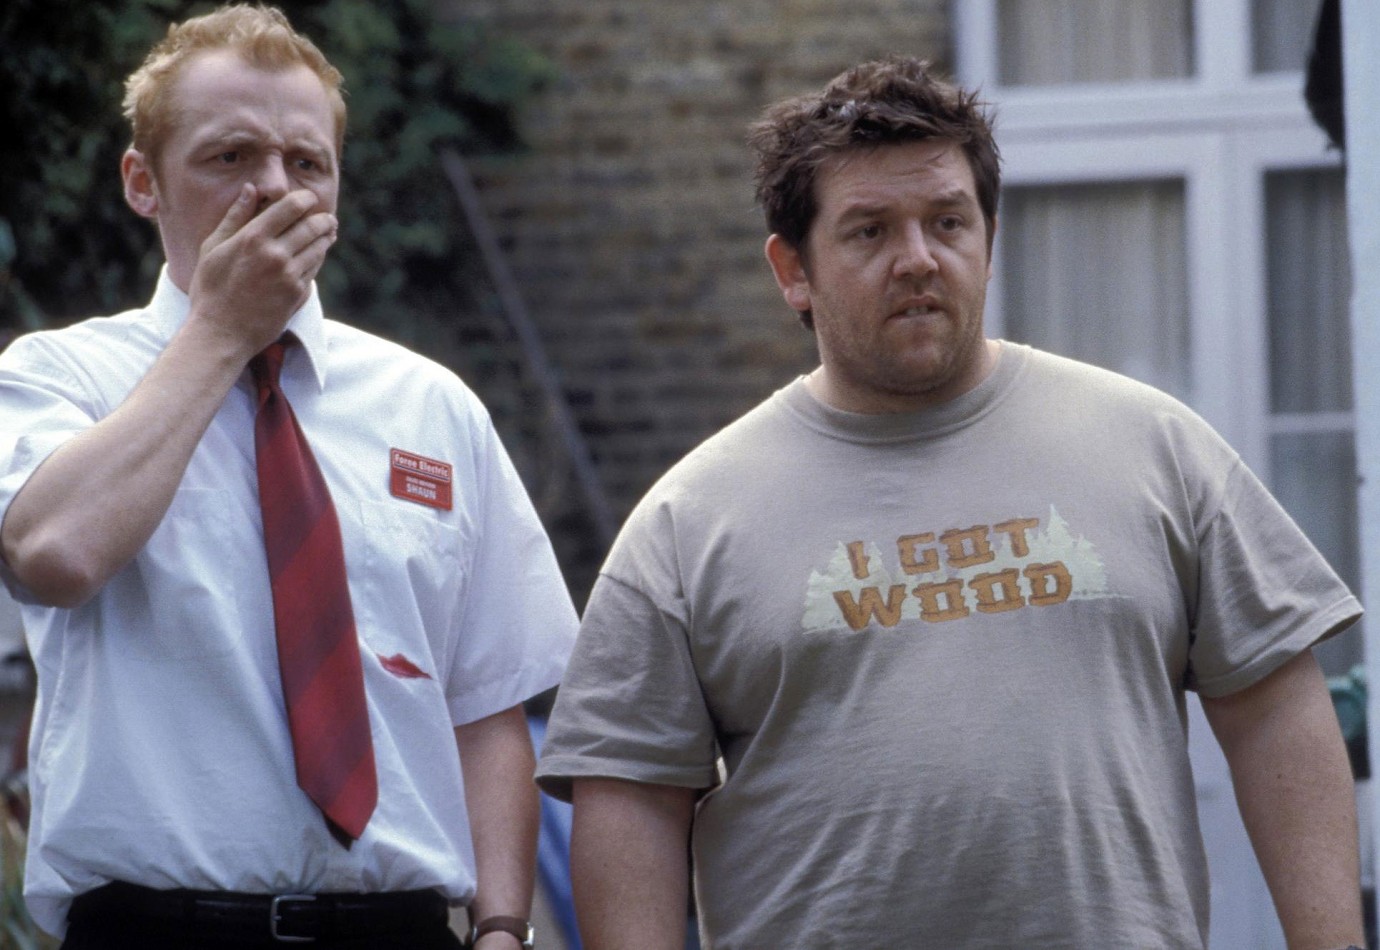 simon-pegg-and-nick-frost-in-shaun-of-the-dead.jpg